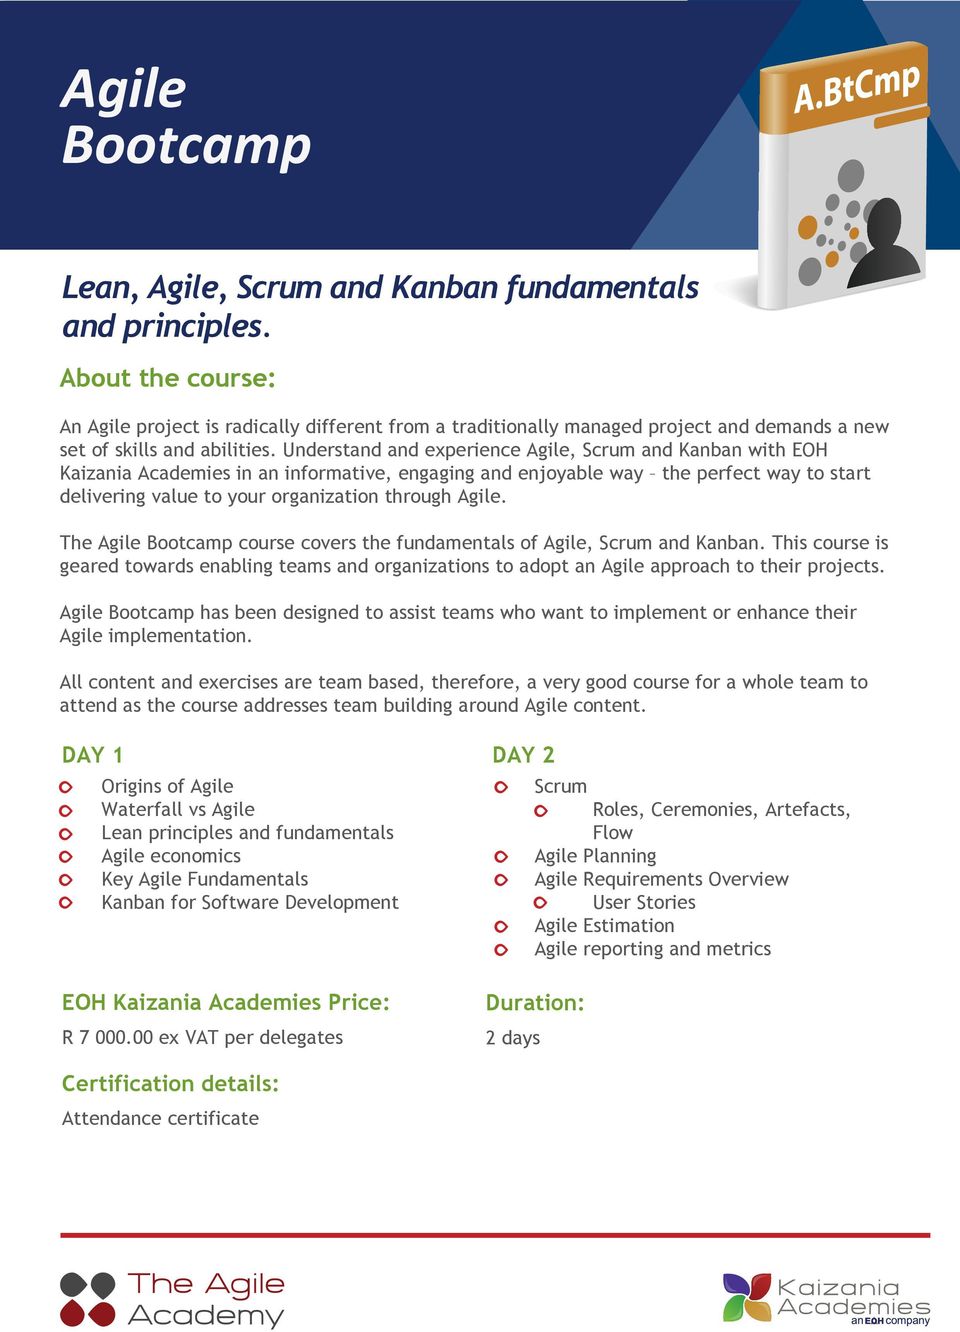 Agile. The Agile Bootcamp course covers the fundamentals of Agile, Scrum and Kanban. This course is geared towards enabling teams and organizations to adopt an Agile approach to their projects.